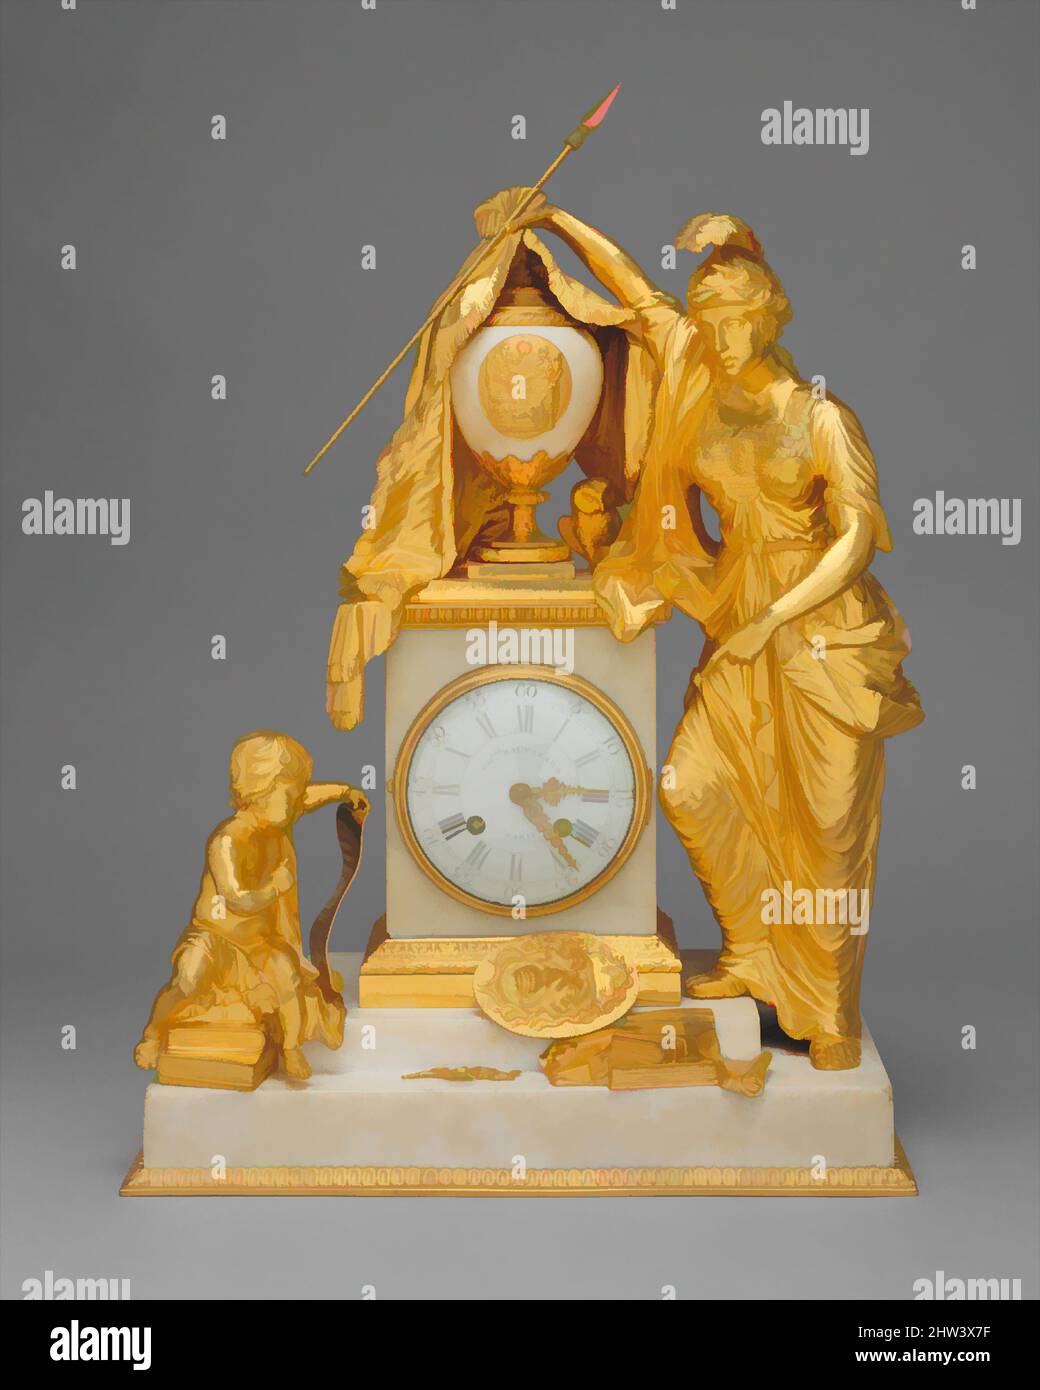 Art inspired by Minerva clock, Case maker: Matthew Boulton (British, Birmingham 1728–1809 Birmingham), Movement: Theodore Rodel (recorded 1840) (Paris, France), and Vincenti et Cie (1831–1890) (Paris, France), Clockmaker: Henri-Charles Baltazard (recorded 1717–72) or, Clockmaker: Louis, Classic works modernized by Artotop with a splash of modernity. Shapes, color and value, eye-catching visual impact on art. Emotions through freedom of artworks in a contemporary way. A timeless message pursuing a wildly creative new direction. Artists turning to the digital medium and creating the Artotop NFT Stock Photo